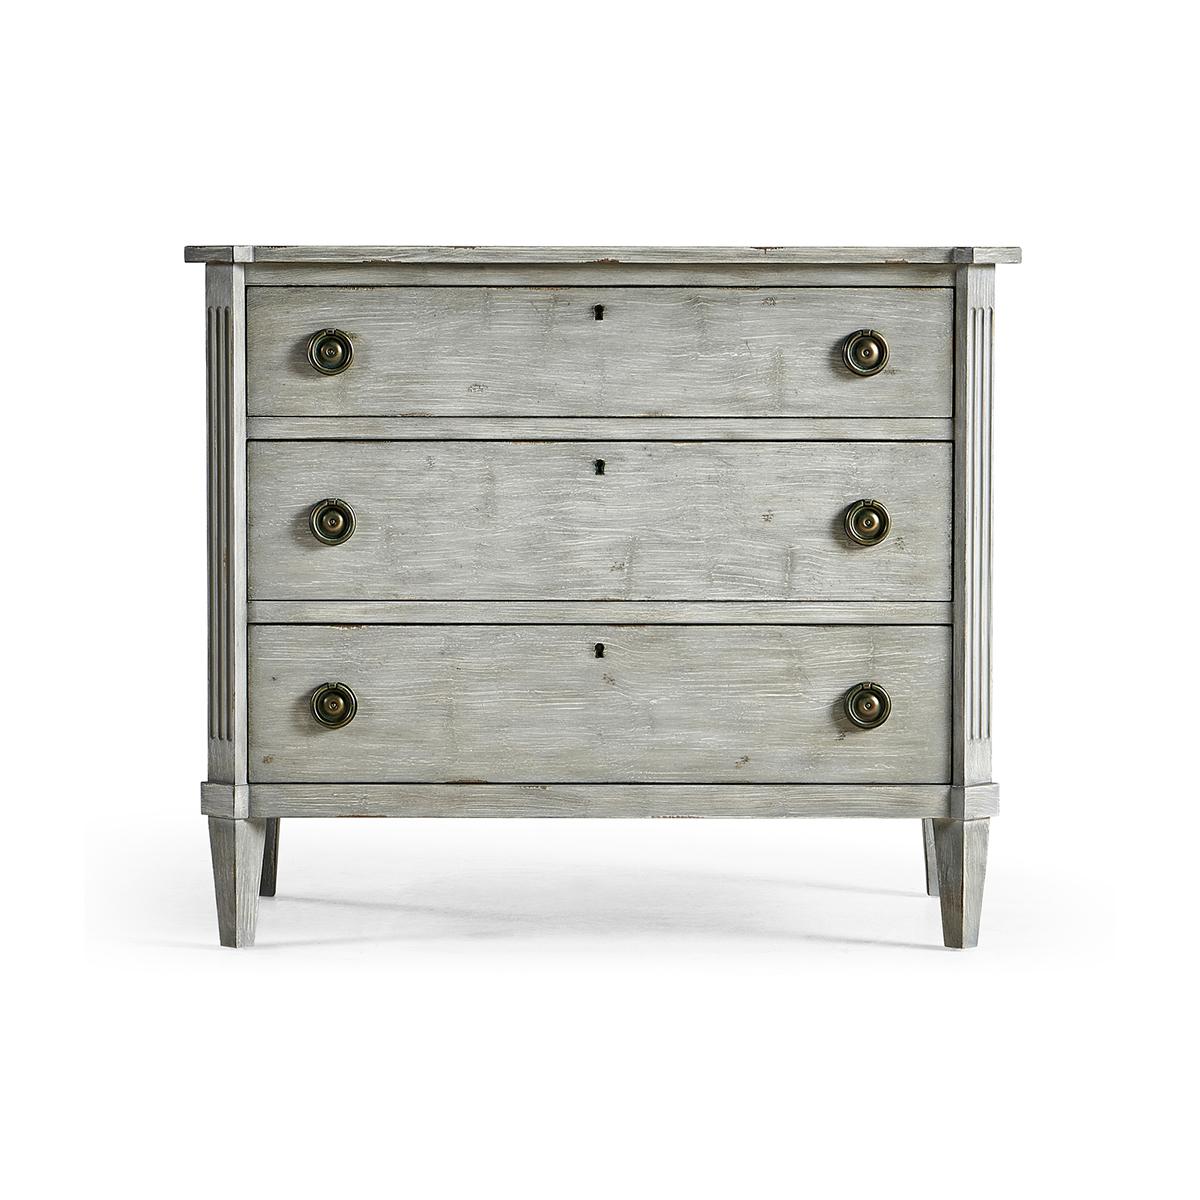 Swedish painted commode, this neo-classic painted commode in an antiqued grey finish with three long lockable drawers, canted corners with fluted stiles, and brass ring pull handles on square tapered legs. 

Dimensions: 38